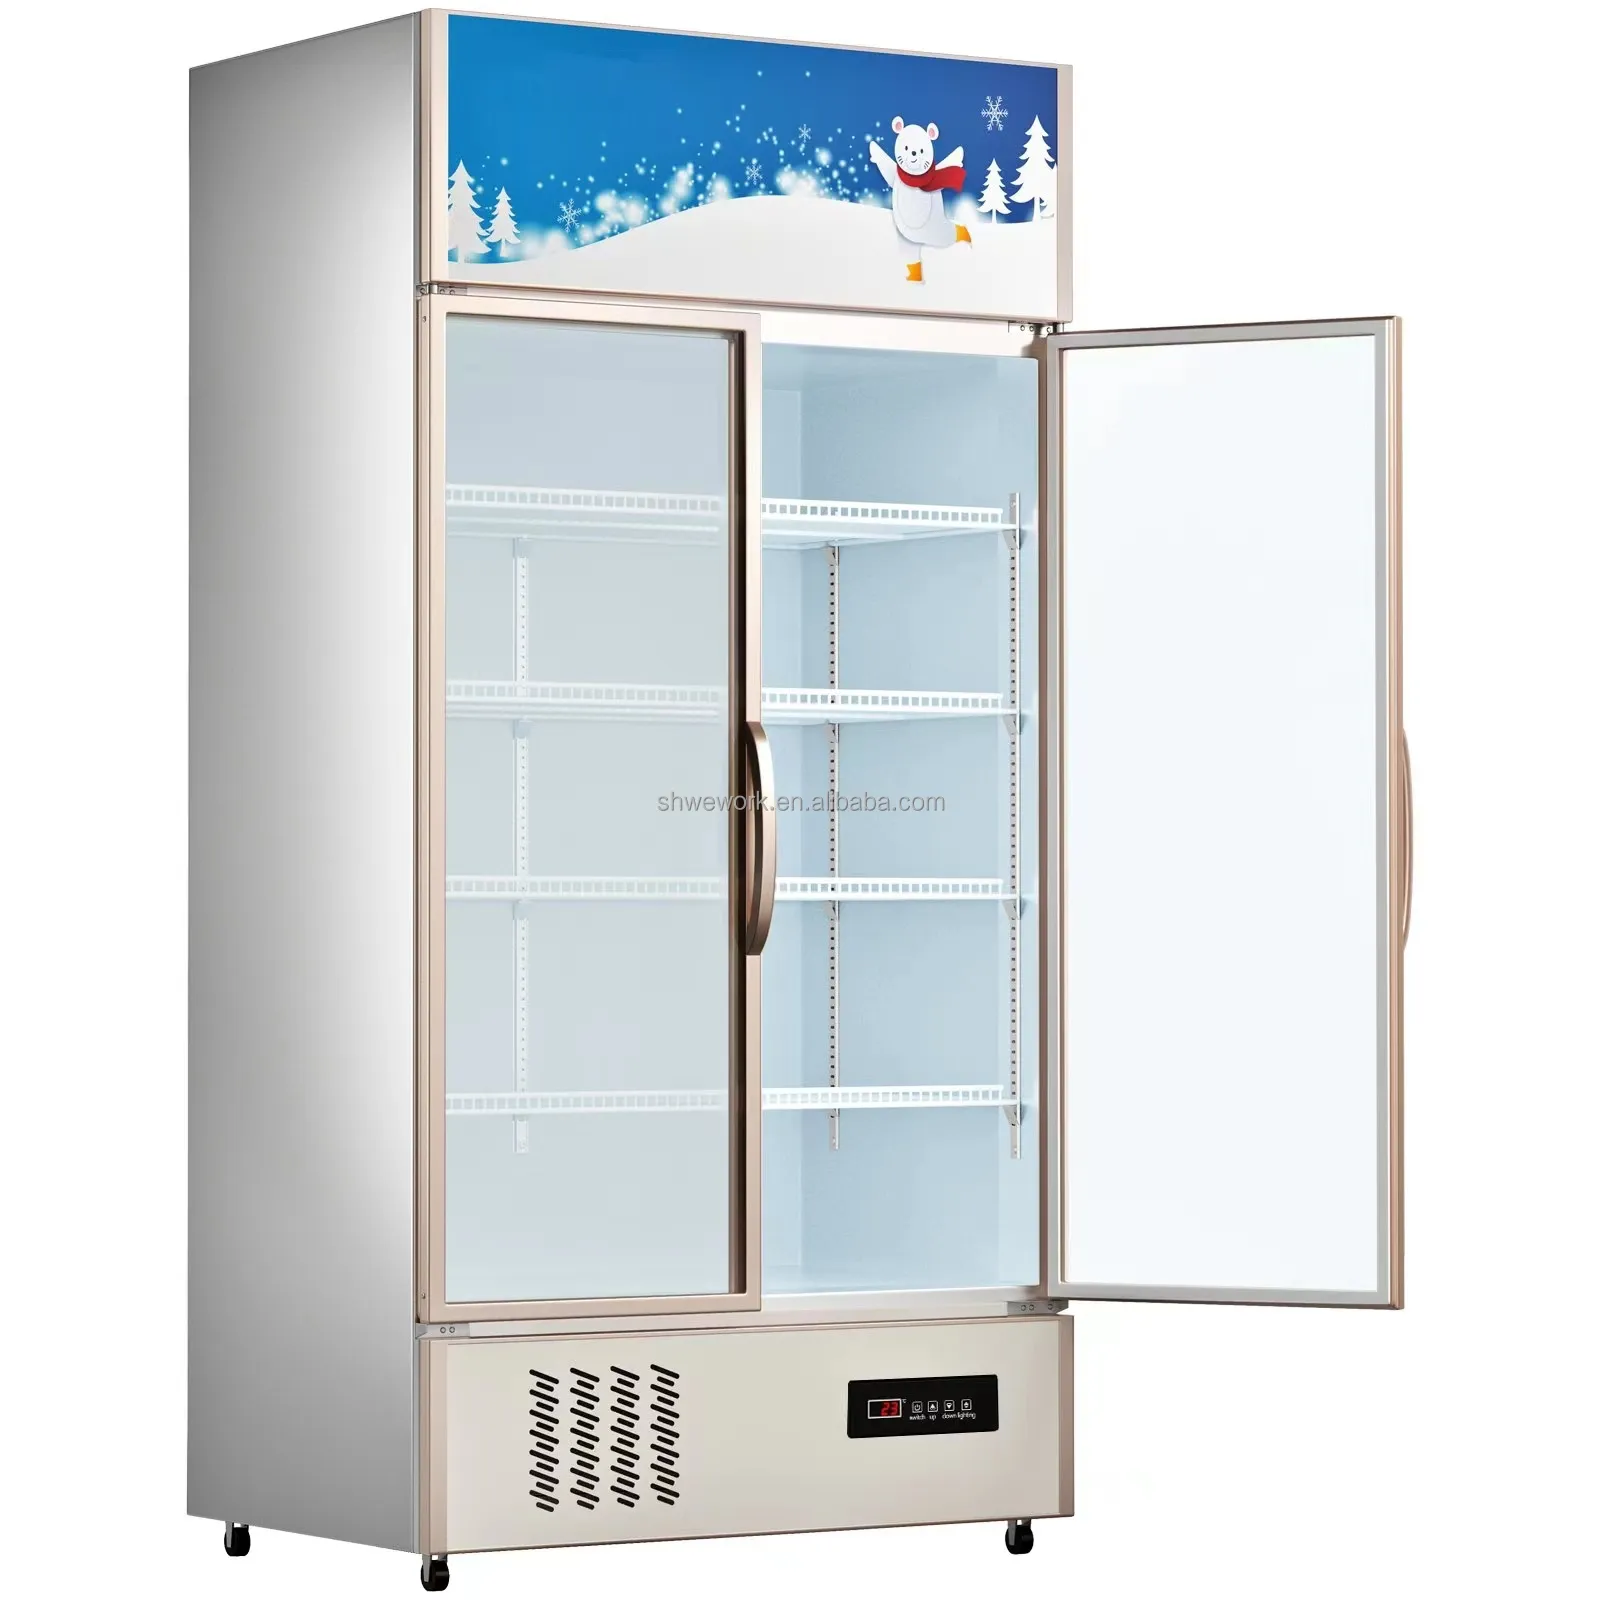 WeWork Commercial Refrigerator Display Fridge Glass Door with LED Light for Home, Store, Gym or Office Upright Beverage Cooler